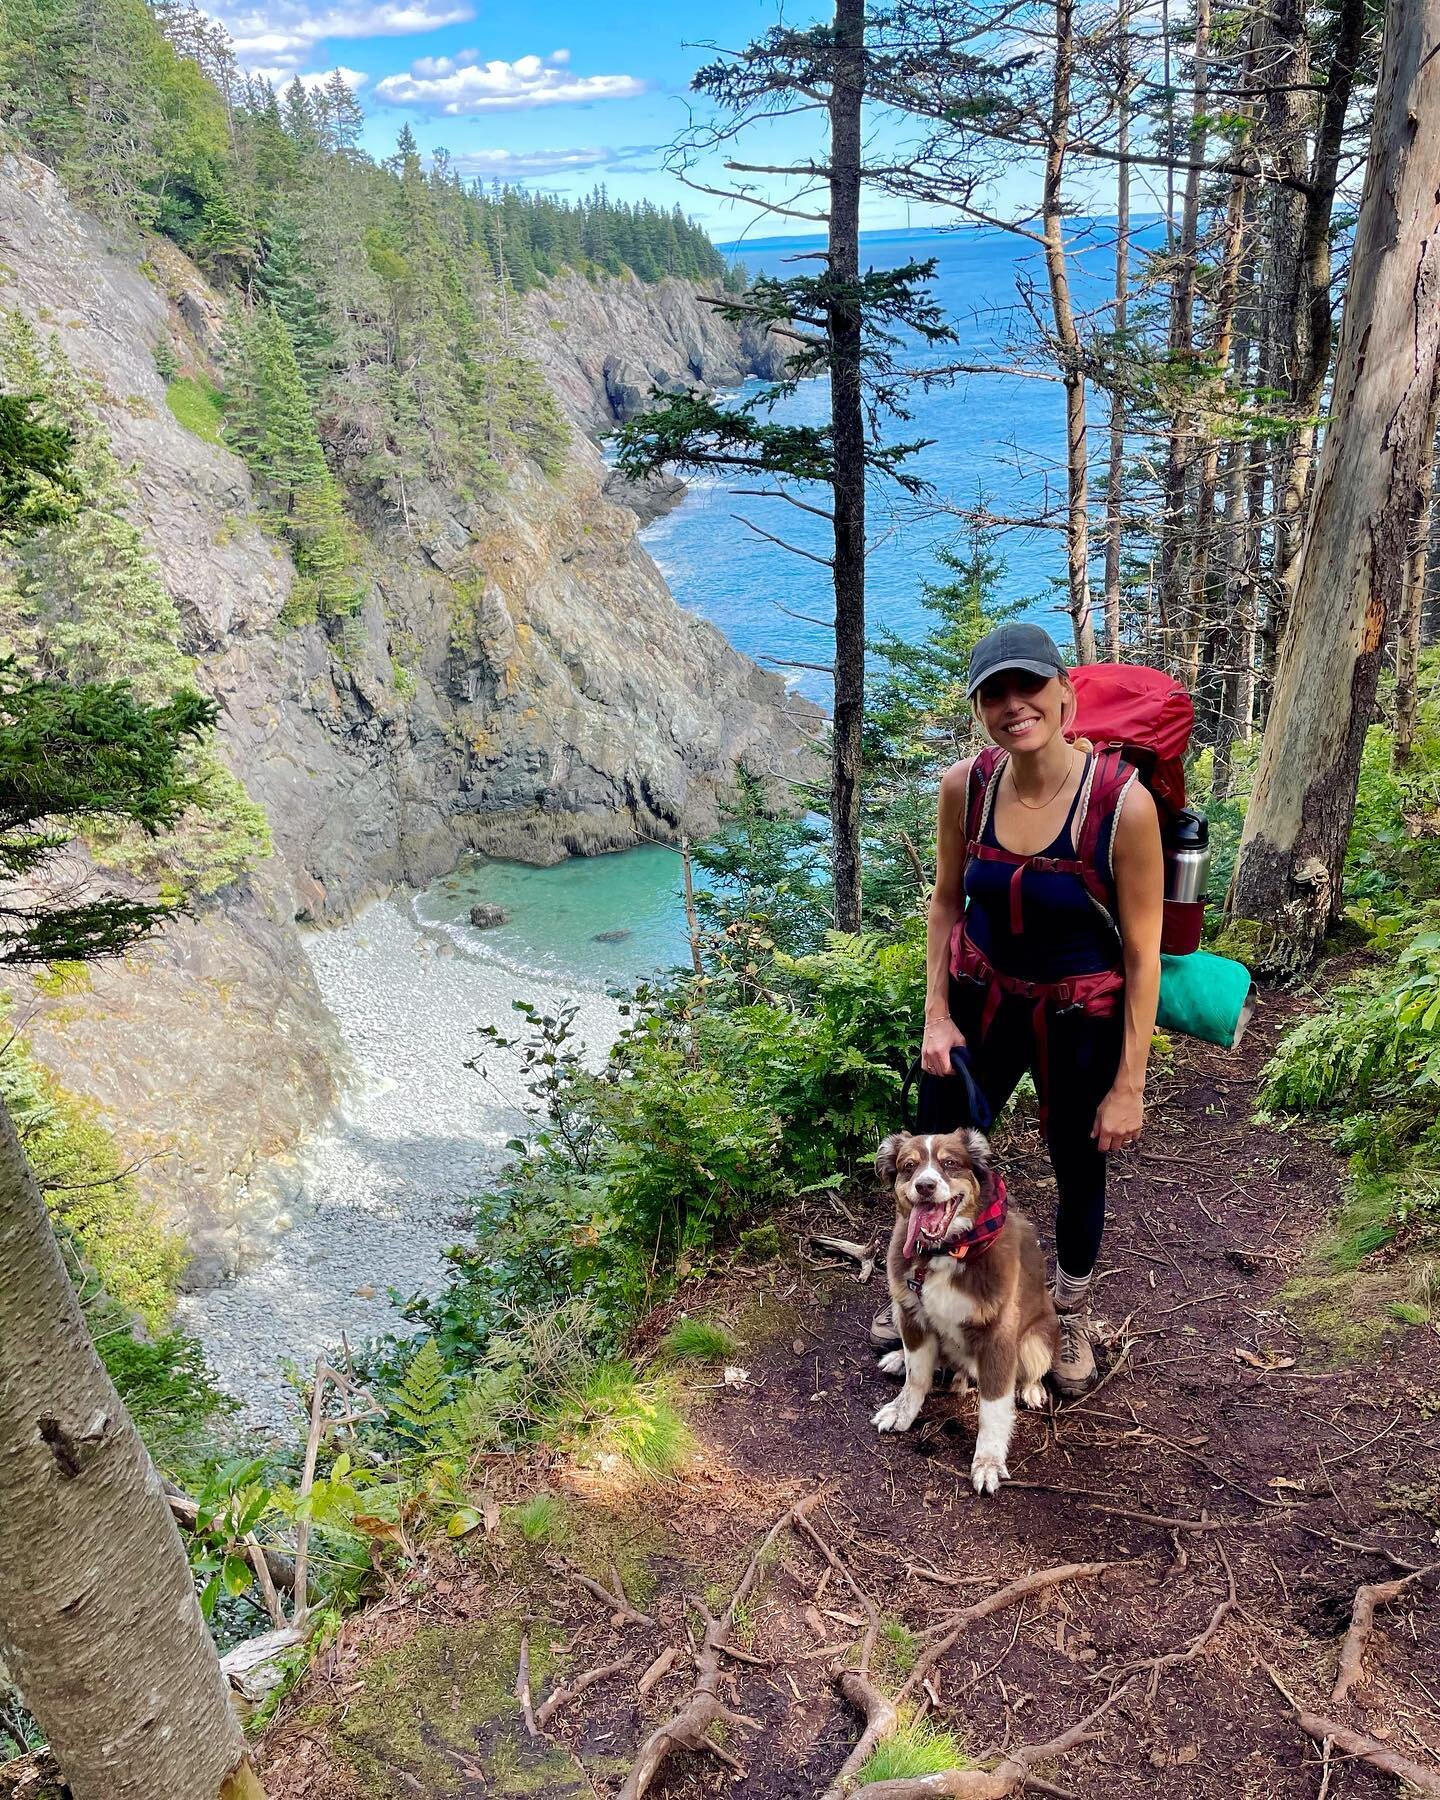 Spent some much needed time in nature this past week hiking in the most magical parts of Maine. For me, hiking and backpacking are so much more than physical activity. Being out in nature away from technology and everyday stressors allows me to clear